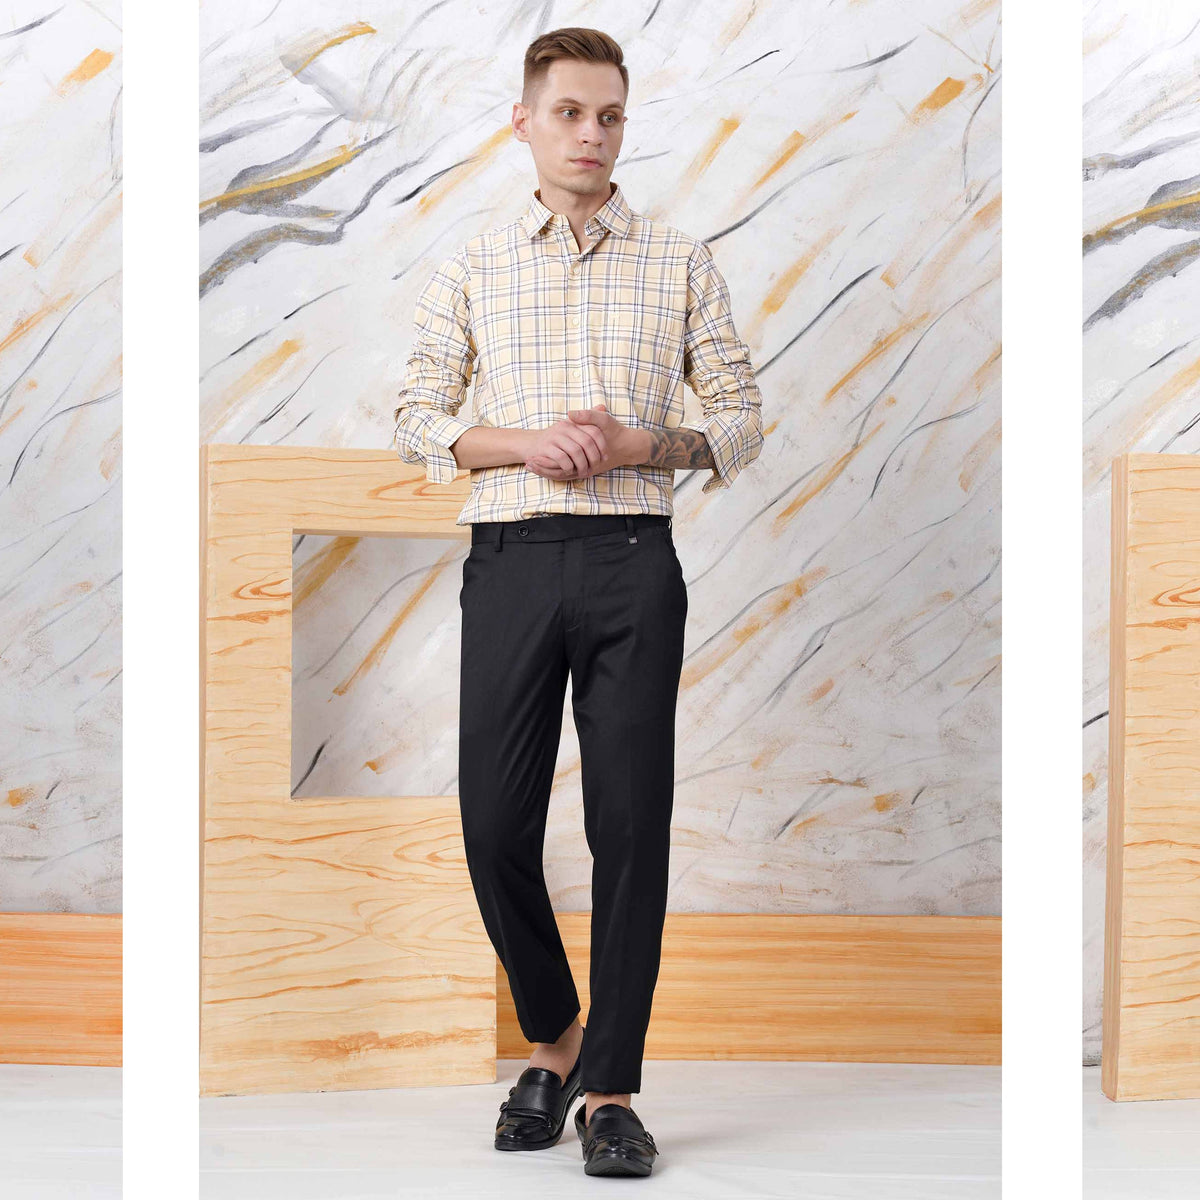 10 Best Formal Pant Shirt Combination Style To Try